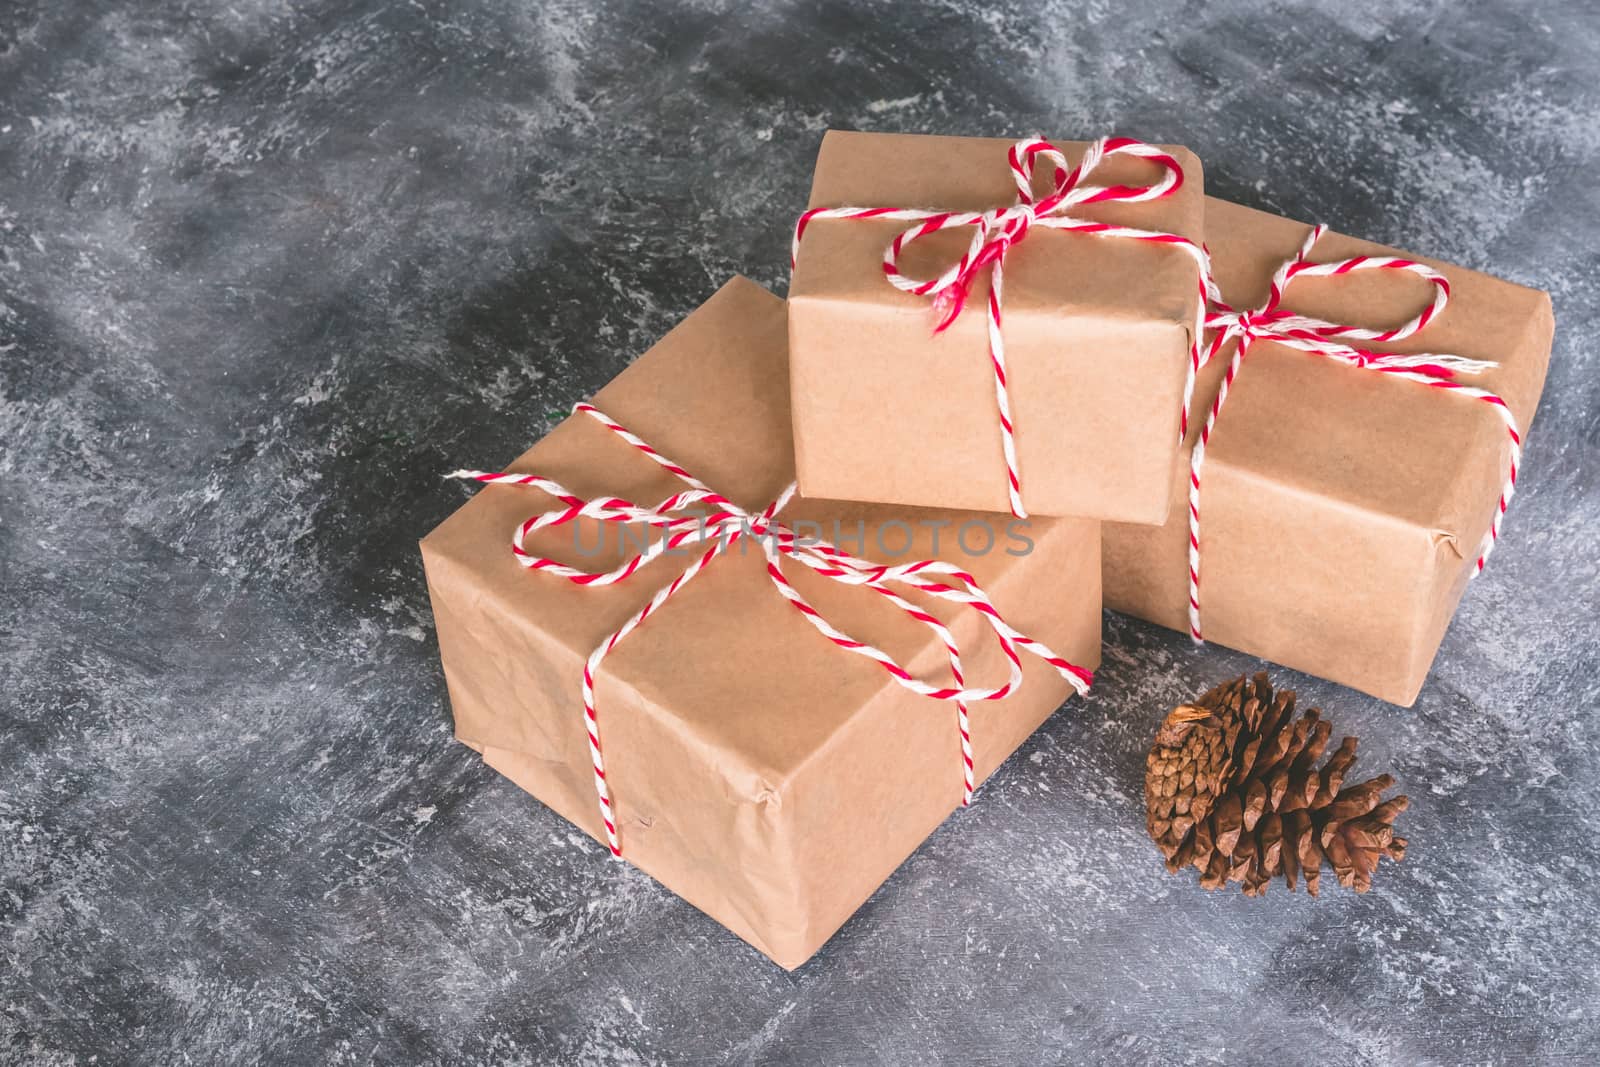 Gift packages wrapped in brown paper on gray grunge background.